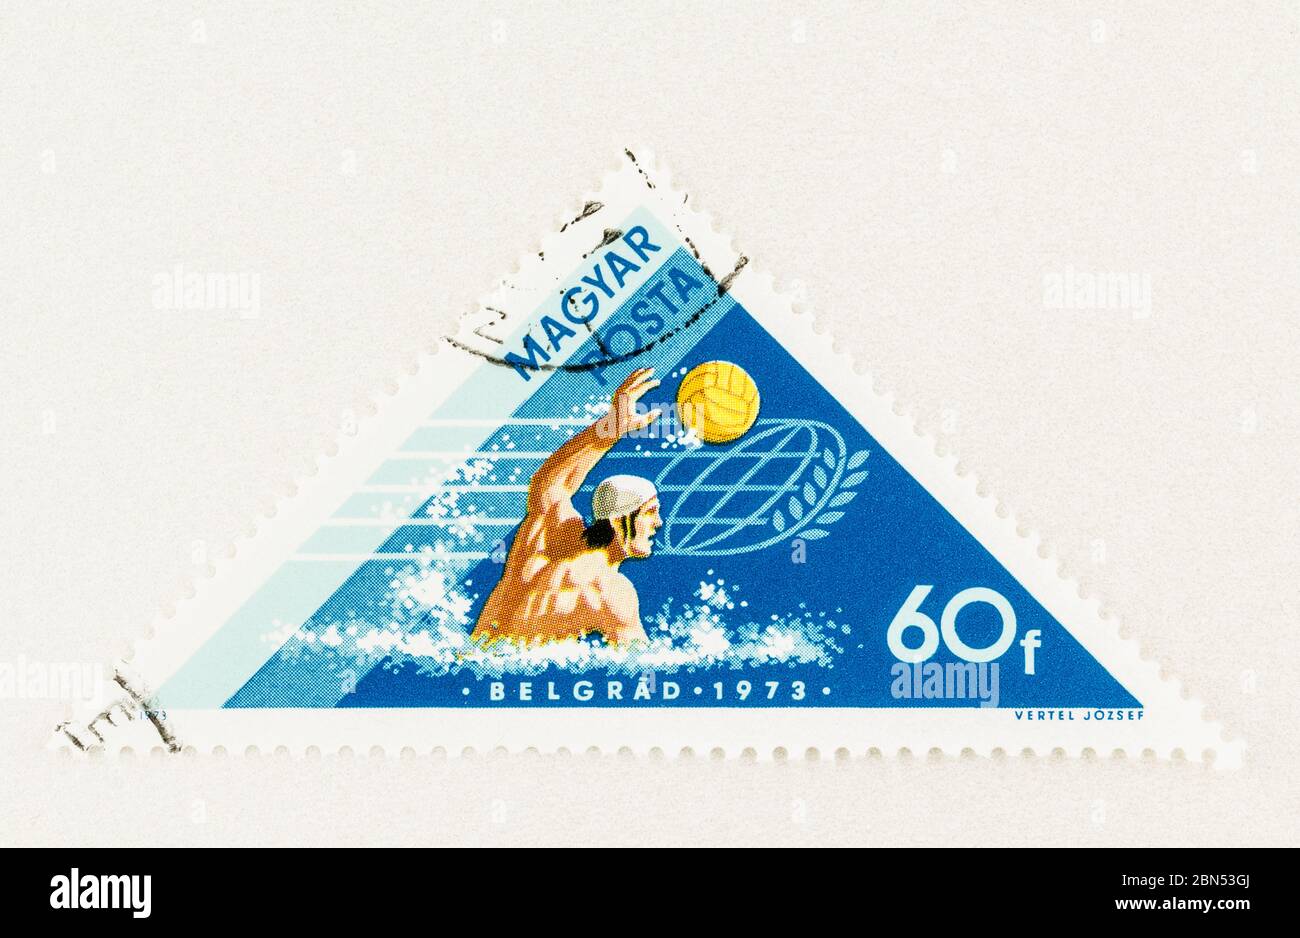 SEATTLE WASHINGTON - May 11, 2020: Water polo World Aquatics Championship at Belgrade  in 1973 on Hungary stamp with copy space. Scott # 2262 Stock Photo